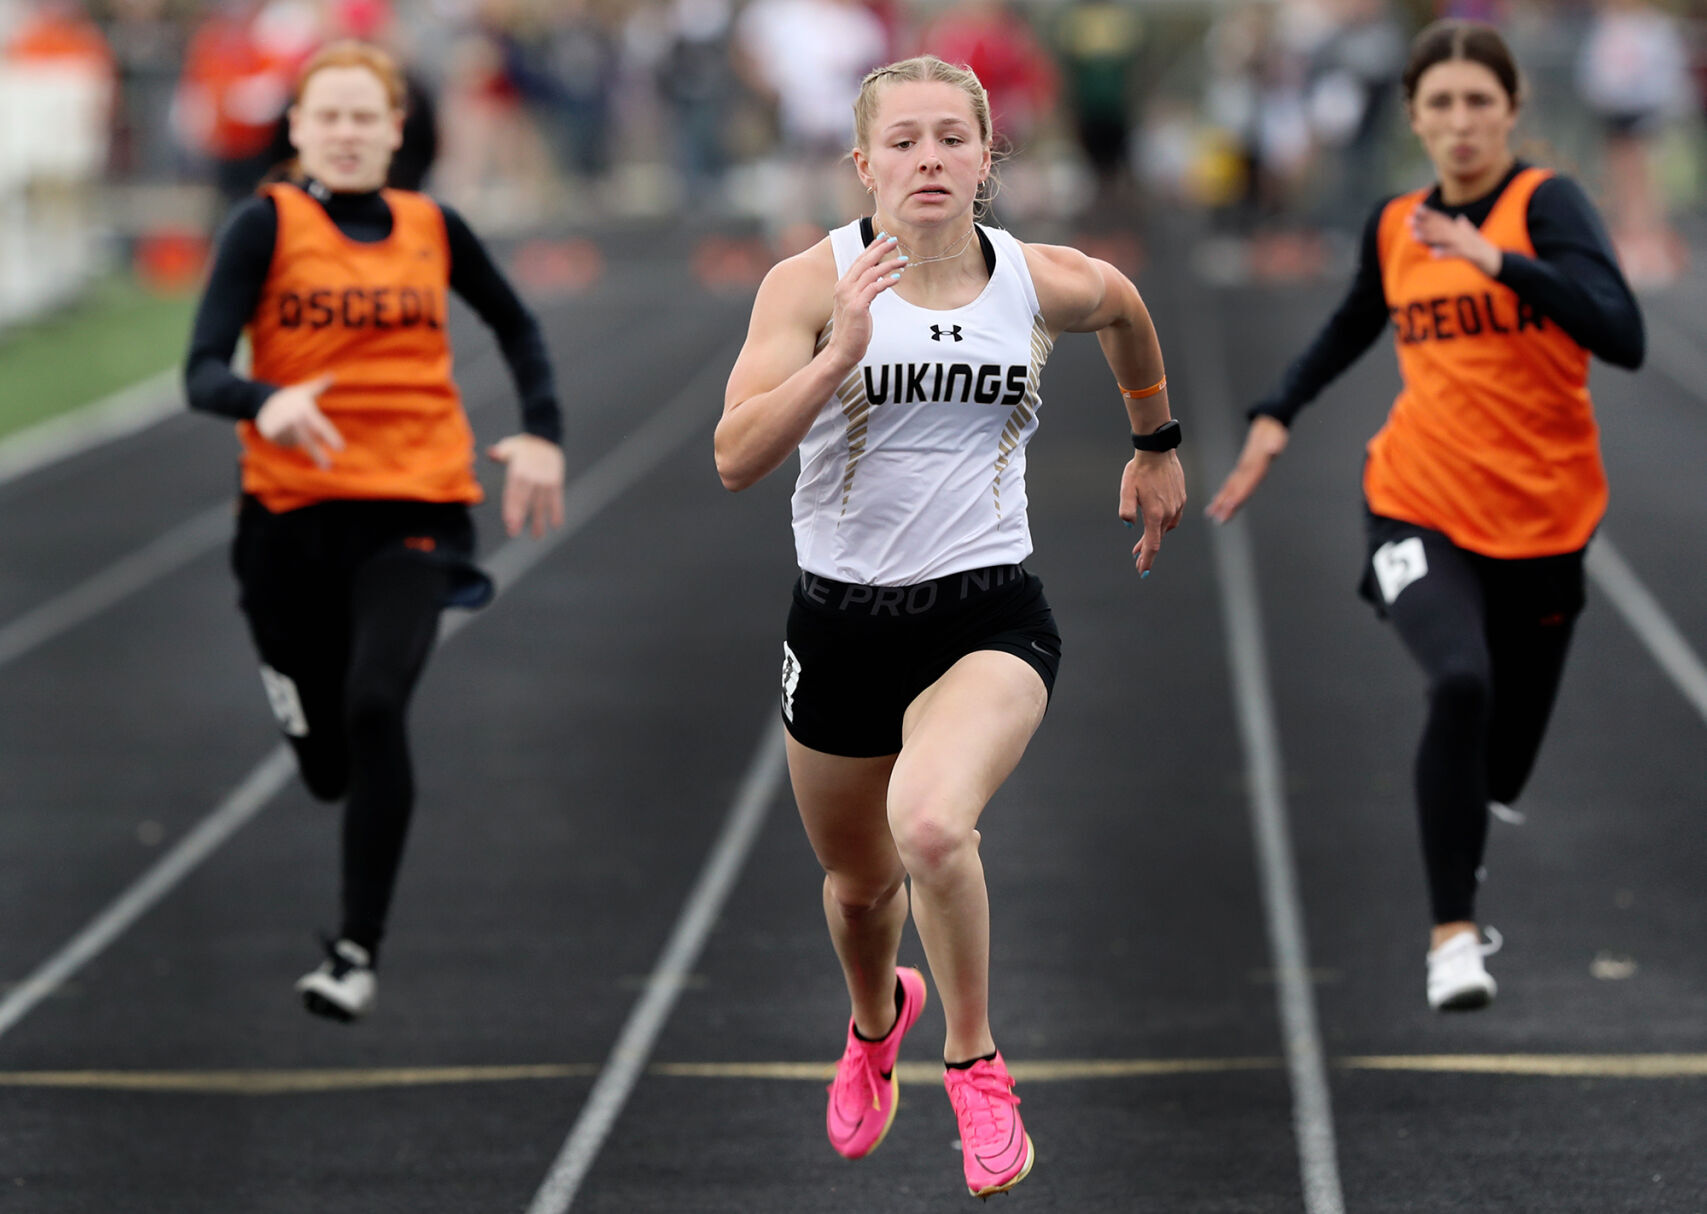 Grand Island Independent Central Nebraska Track and Field Championship